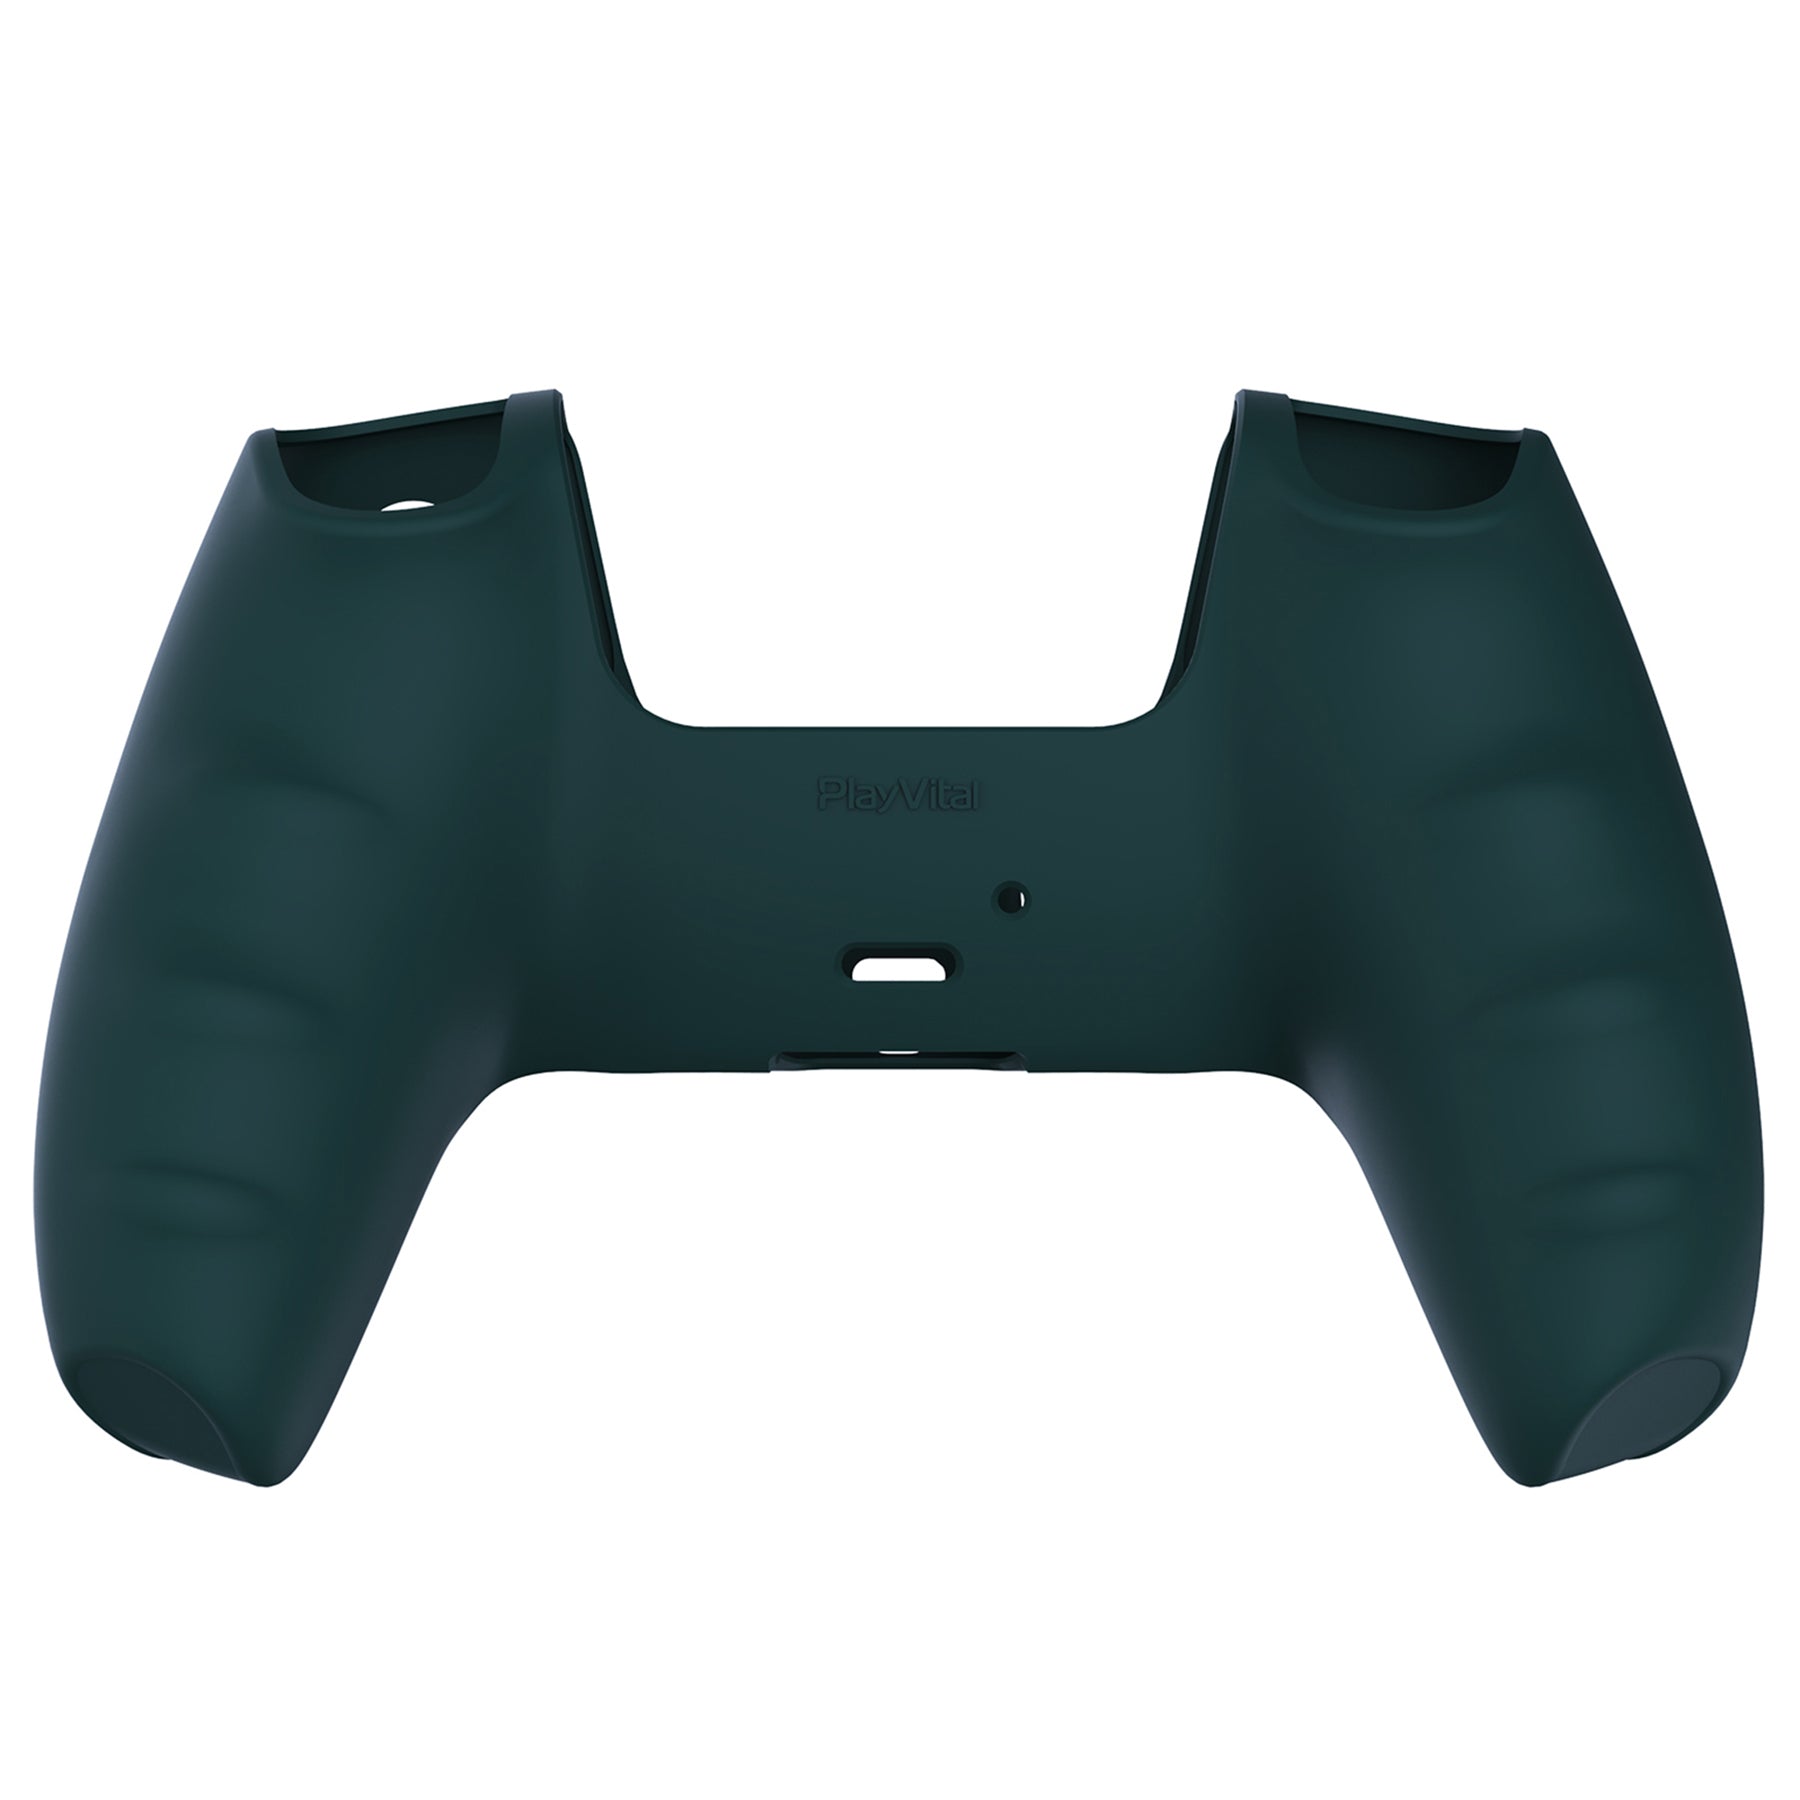 PlayVital Pure Series Anti-Slip Silicone Cover Skin with Thumb Grip Caps for PS5 Wireless Controller - Racing Green - KOPF004 PlayVital